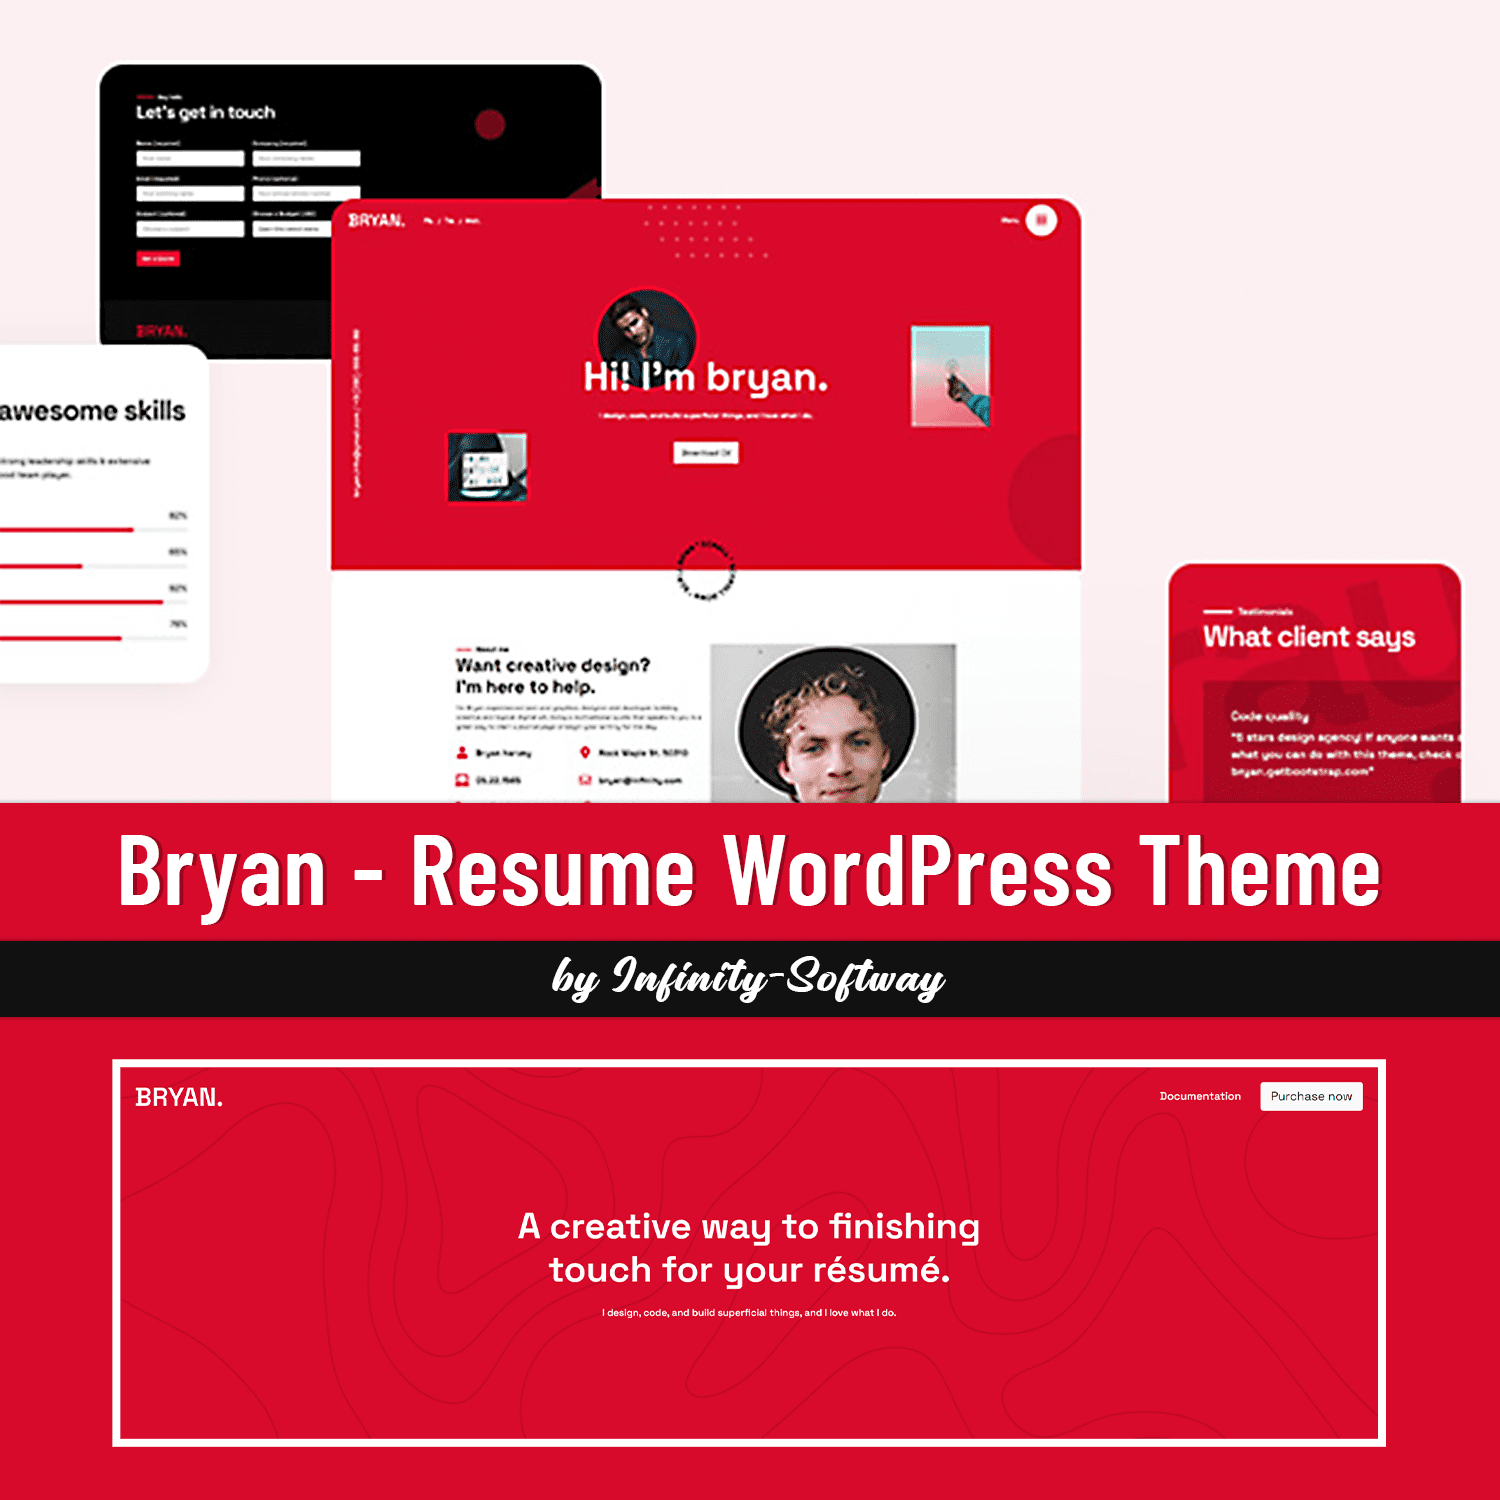 A creative way to finishing touch for your resume.